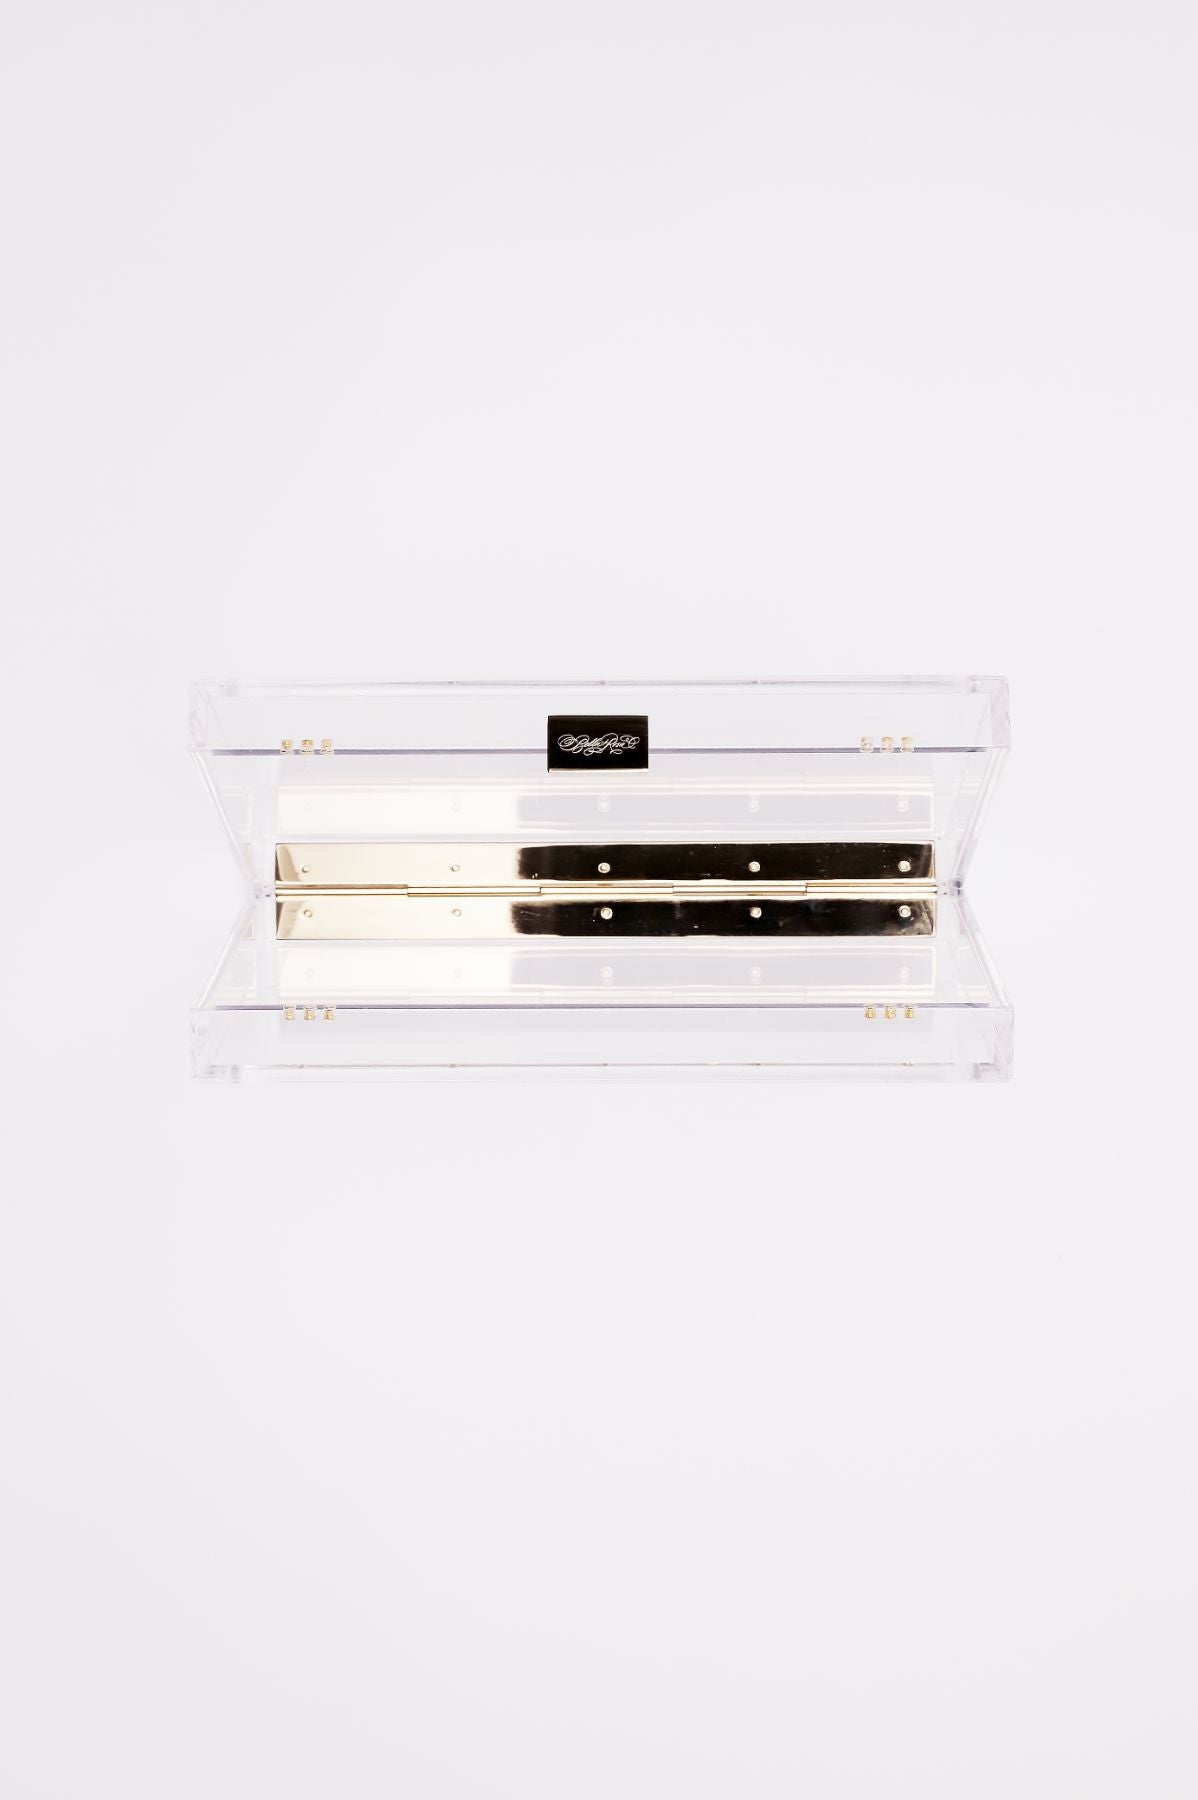 The Bella Rosa Collection Mia Acrylic Clutch with Ivory Satin Zipper Pouch with a harmonica inside against a white background.